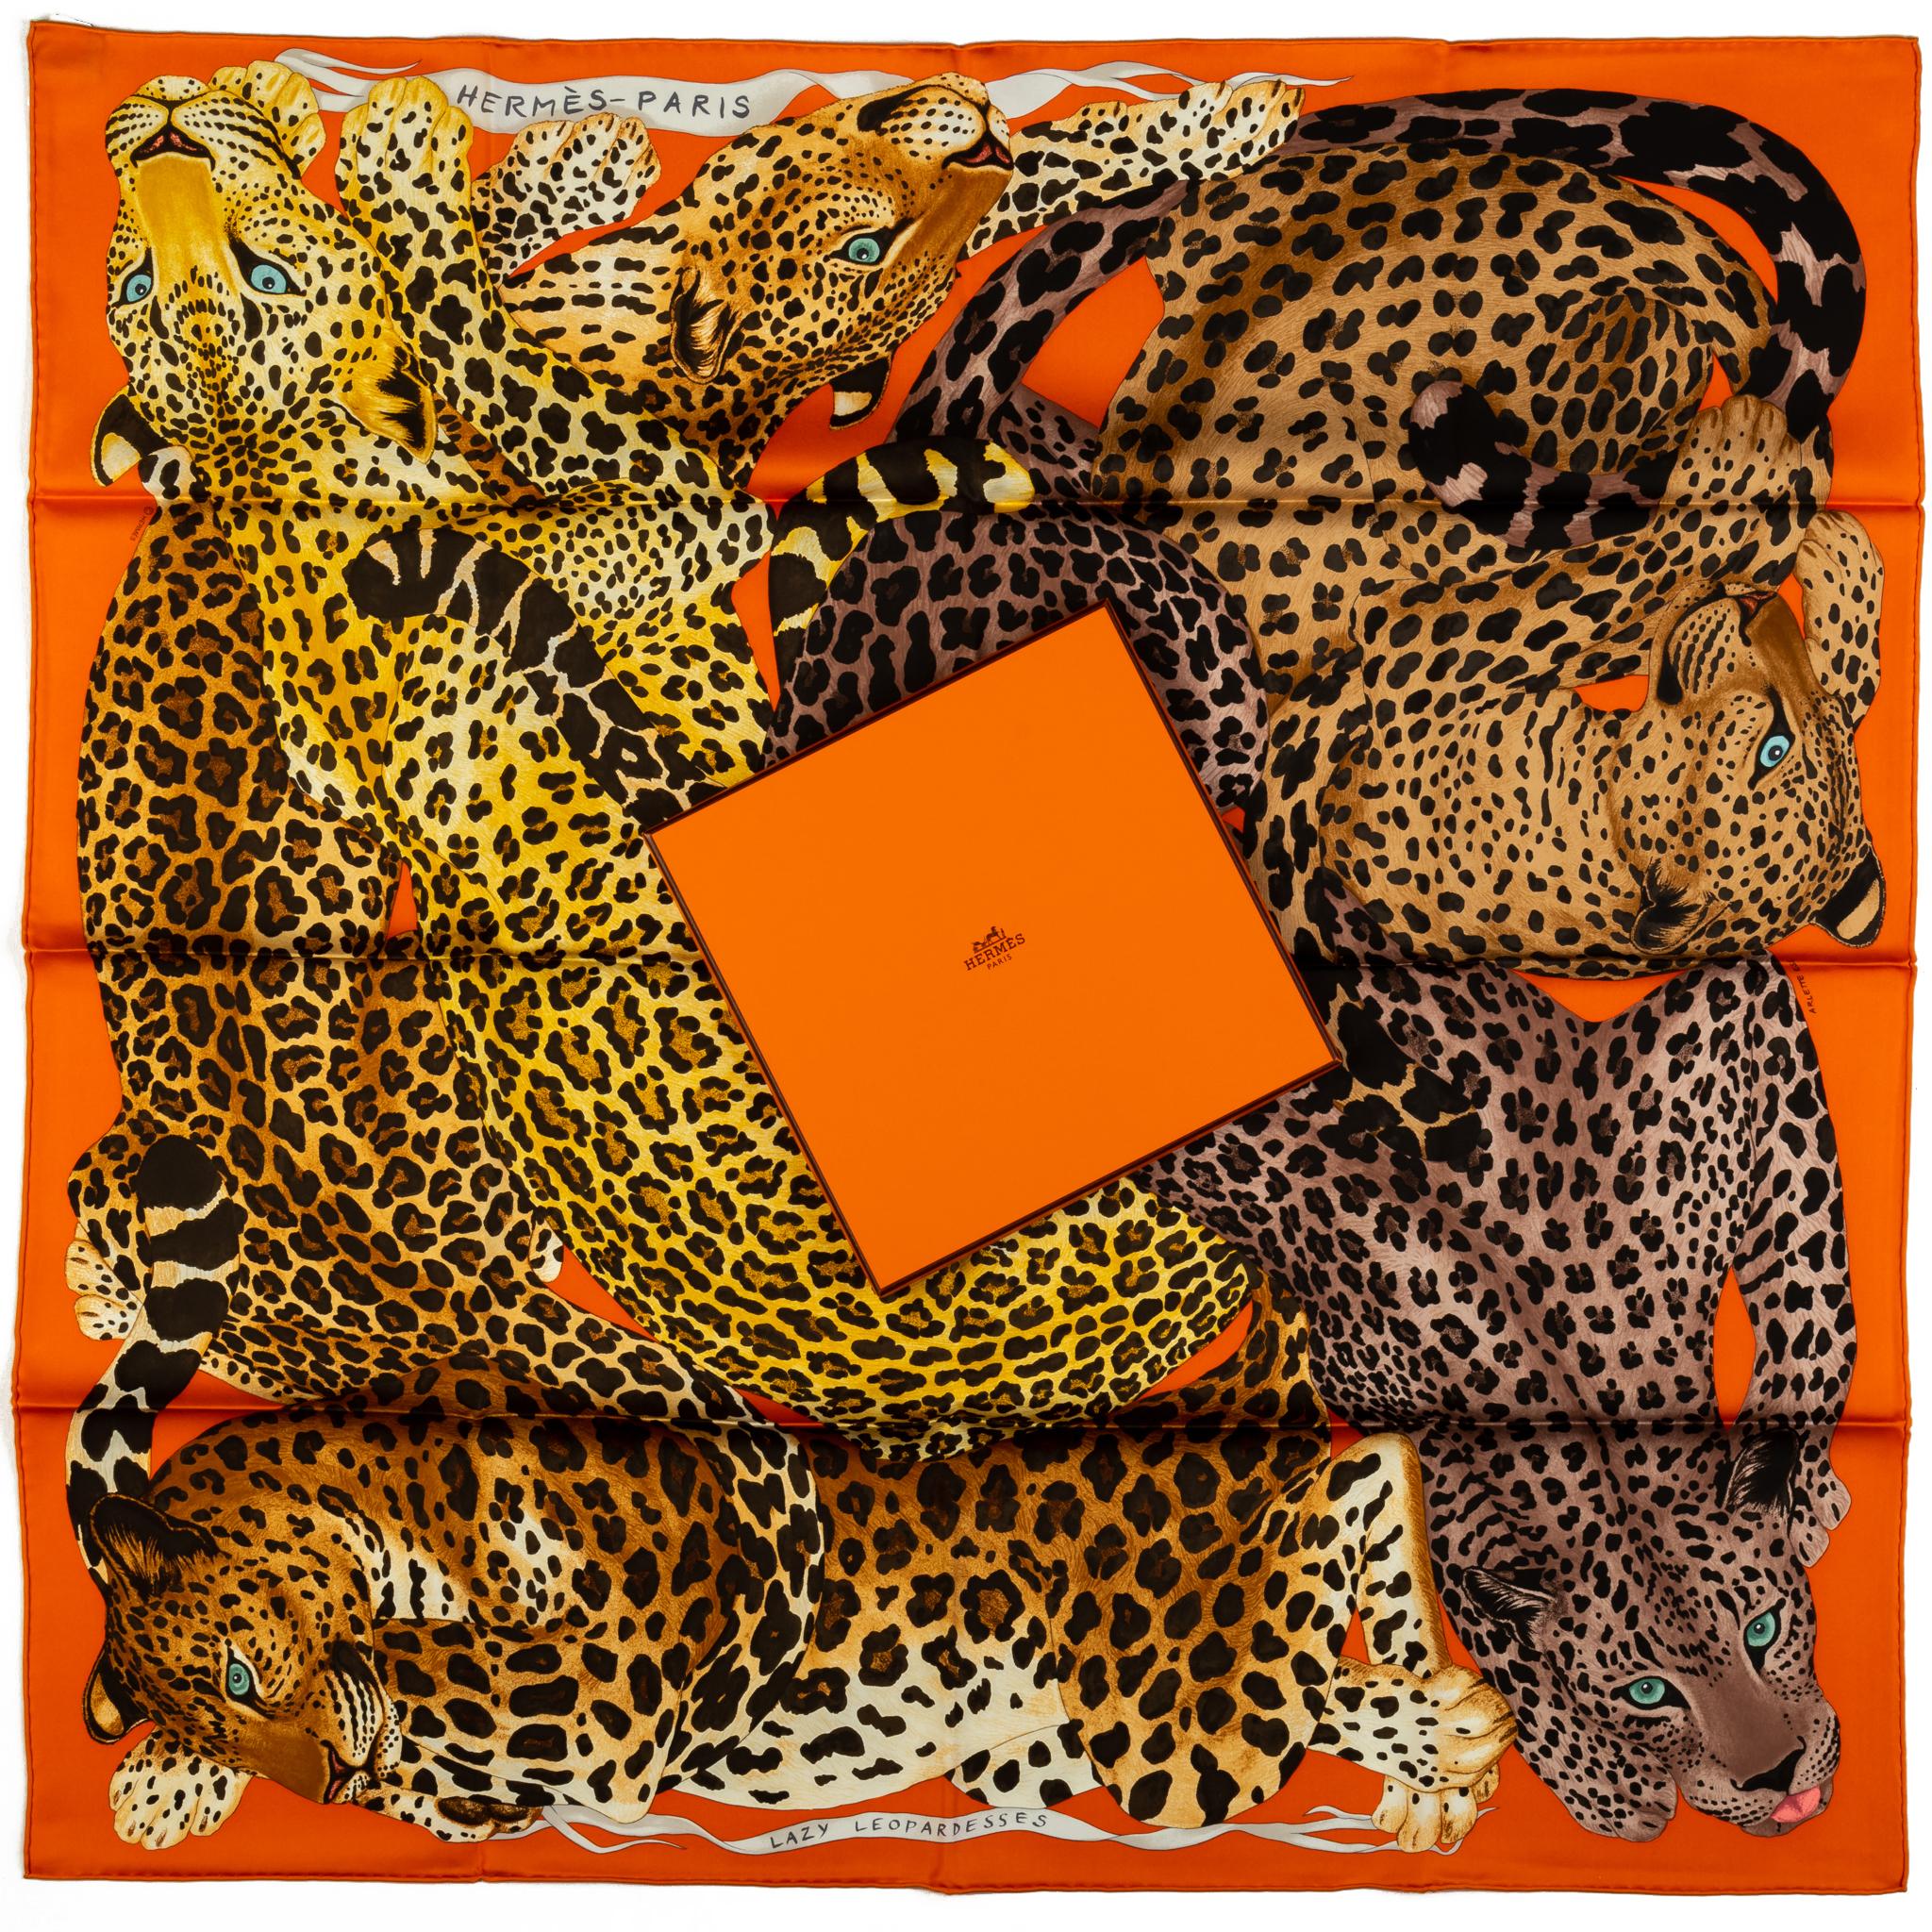 Hermès new Lazy Leopardess silk scarf . Orange color way. Hand rolled edges. Comes with original box.